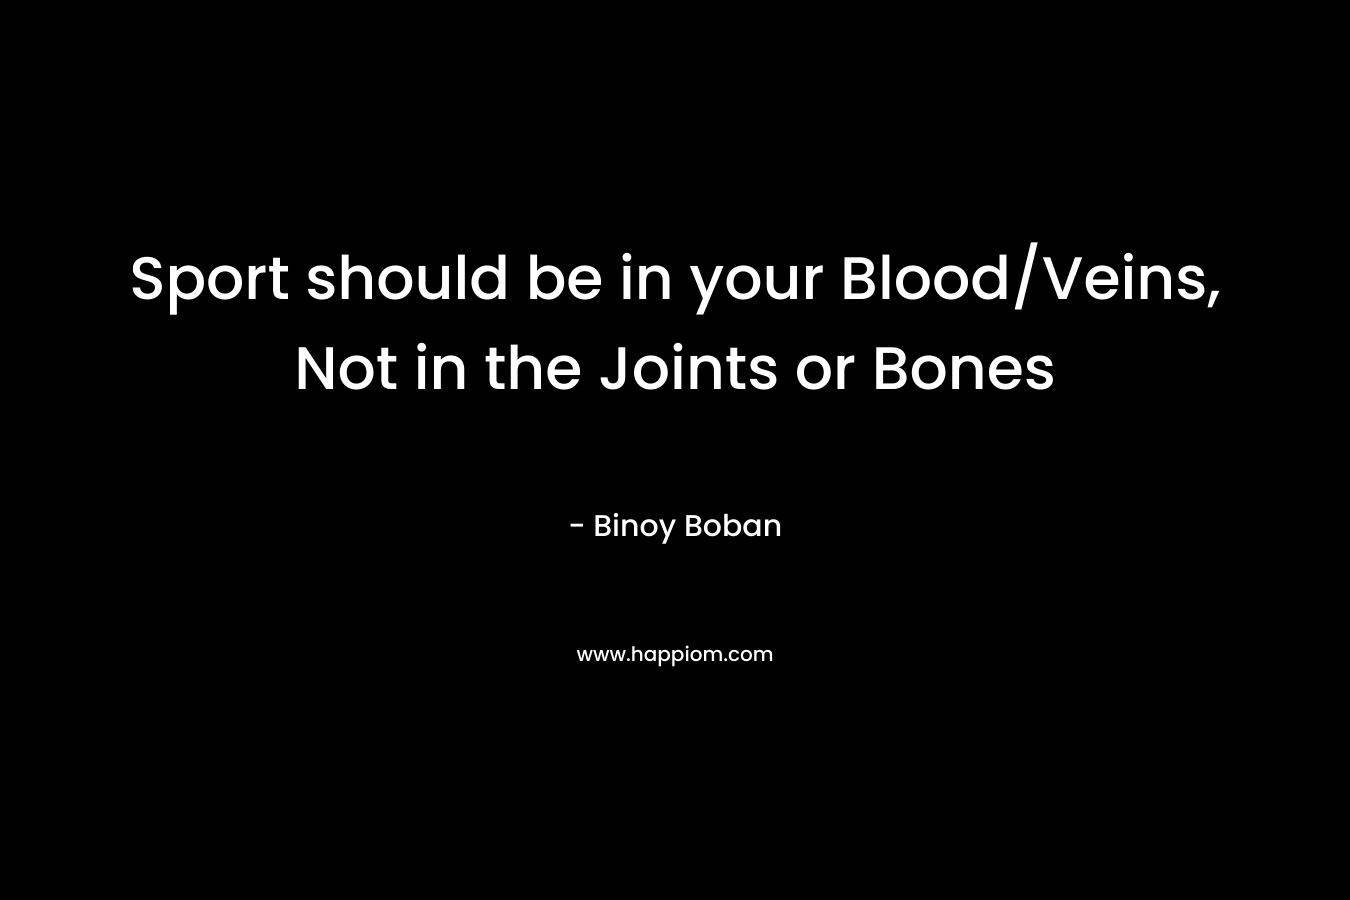 Sport should be in your Blood/Veins, Not in the Joints or Bones – Binoy Boban